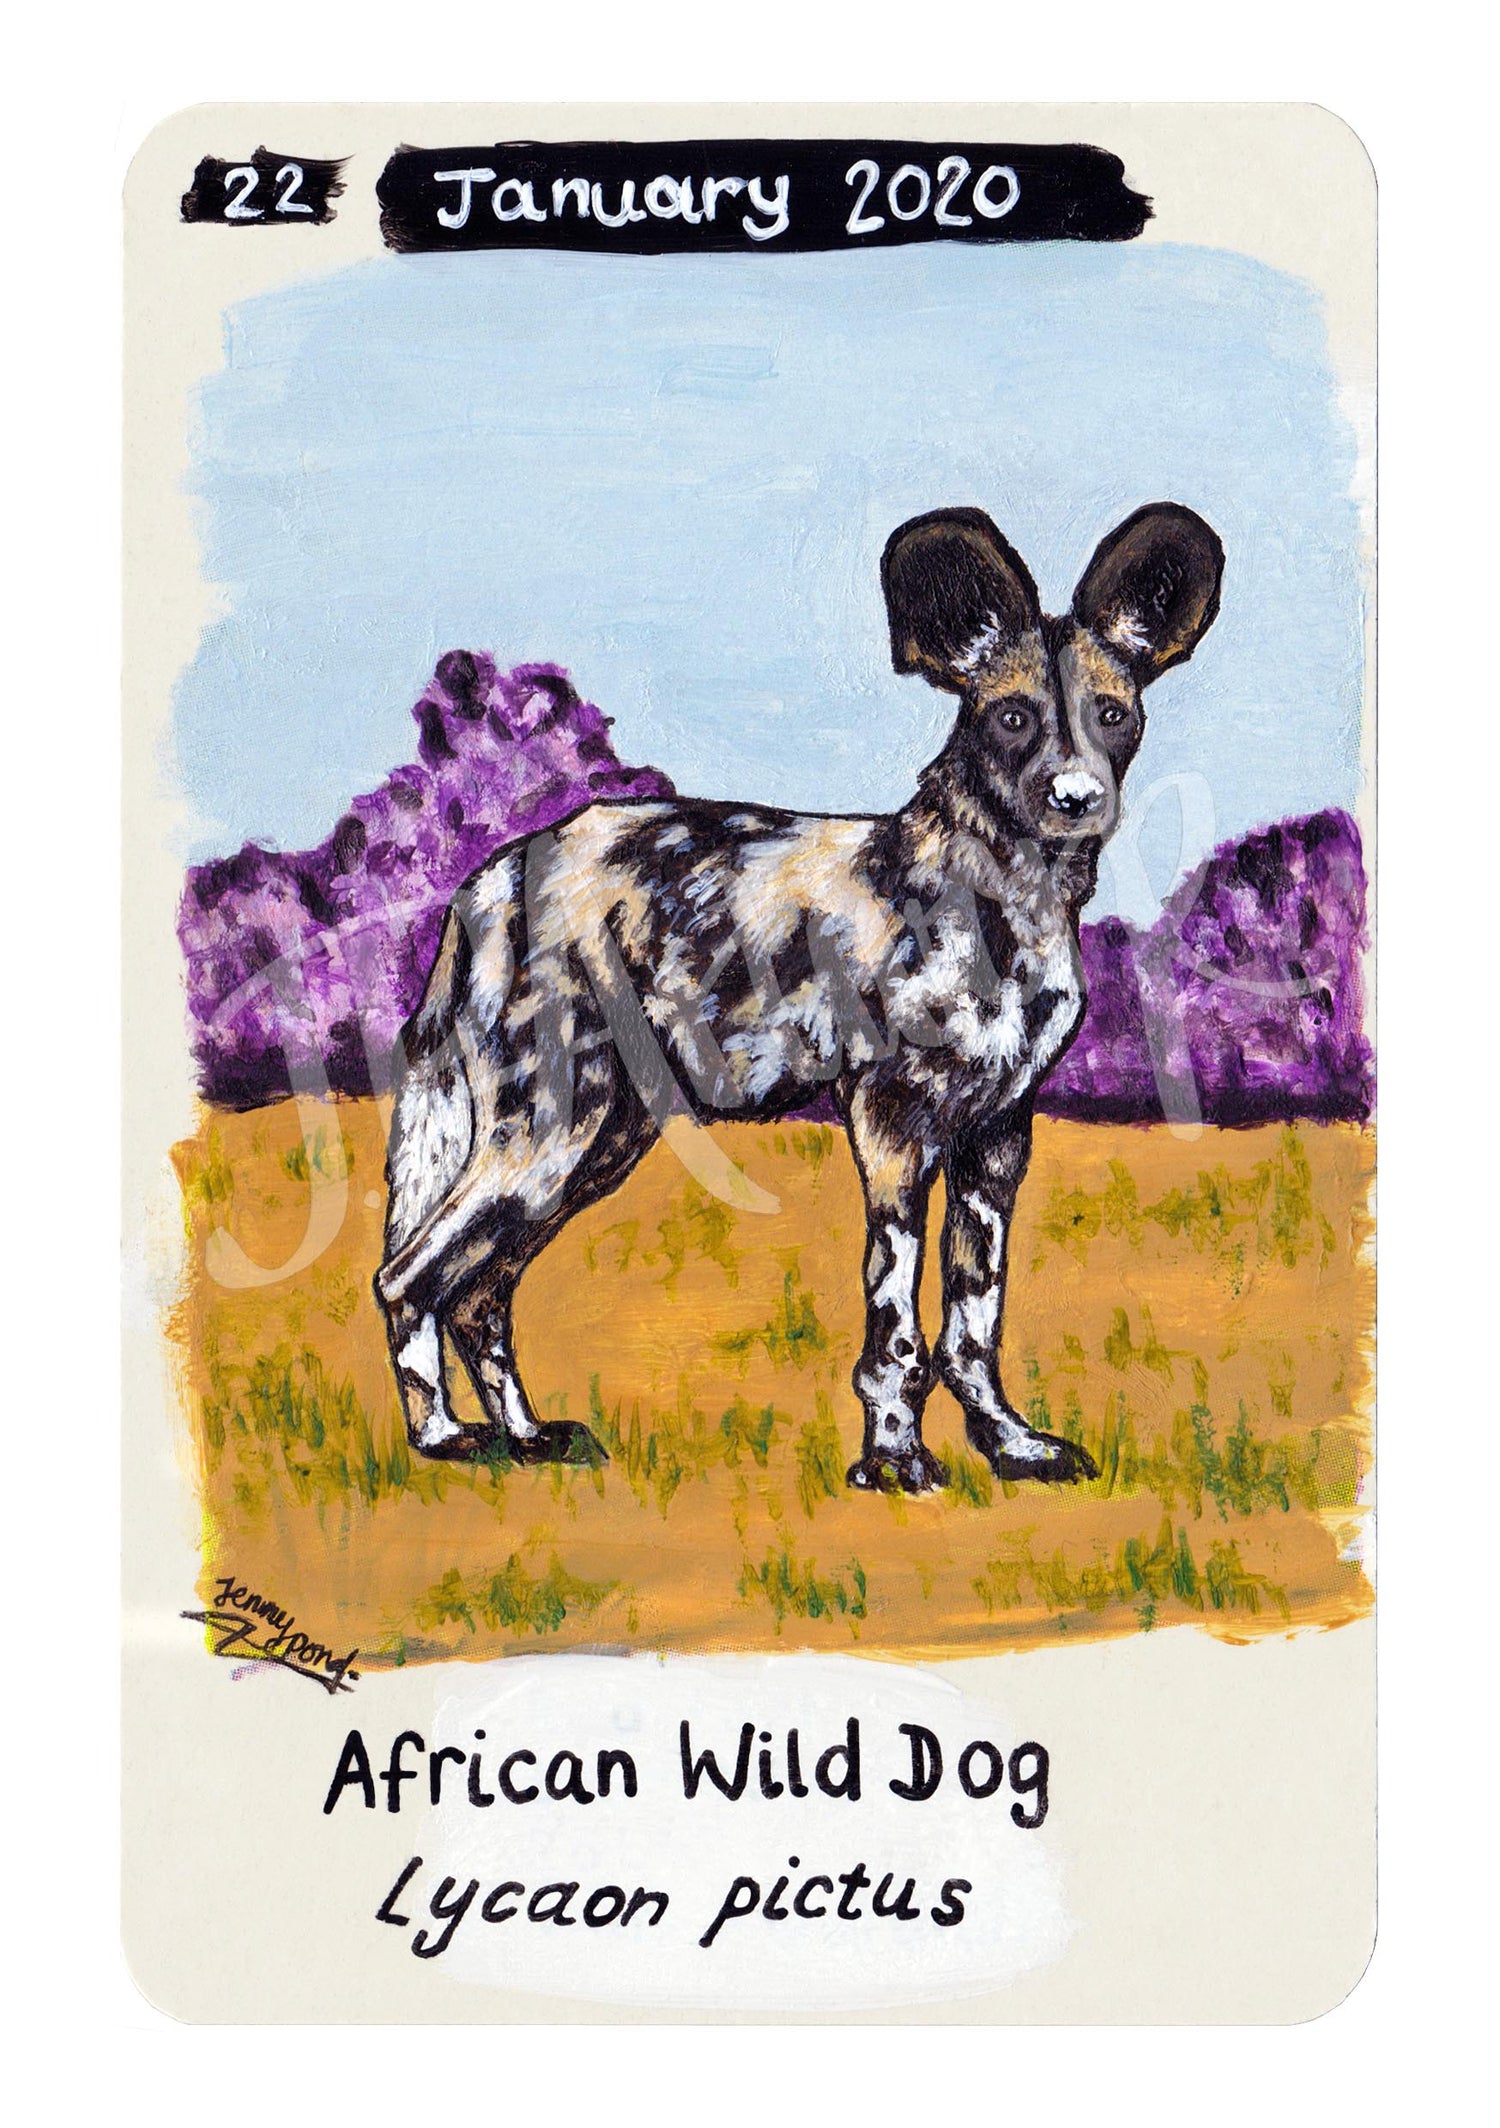 African Wild Dog Limited Edition A5 Hemp Paper Print by Jenny Pond, JPArtwork